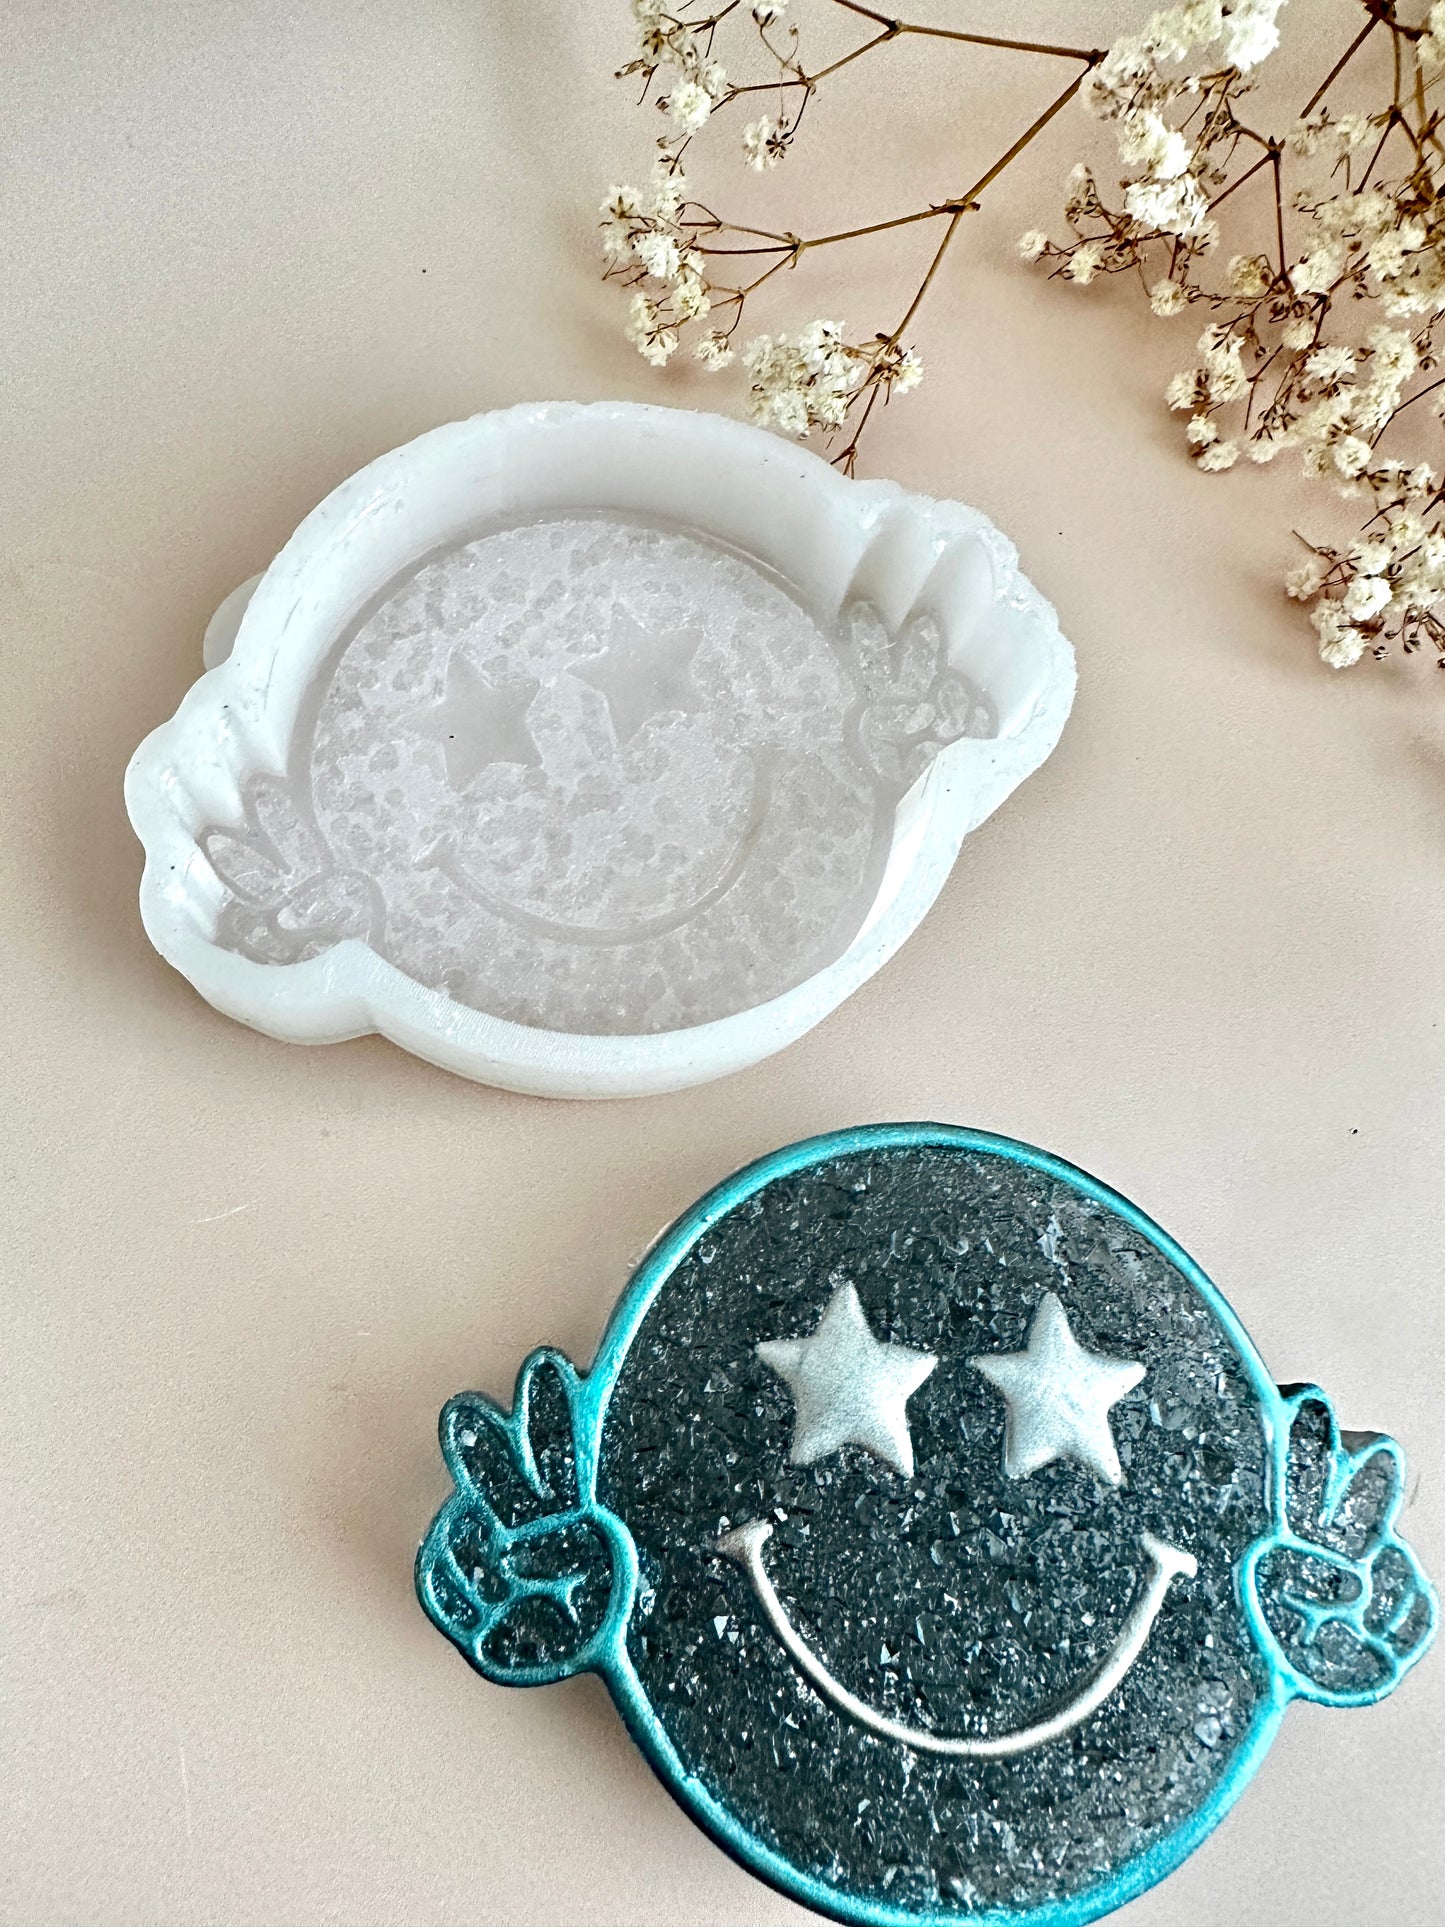 Crafty Creations: Big and Bold Smiley Silicone Mold for Stunning Resin Art Pieces